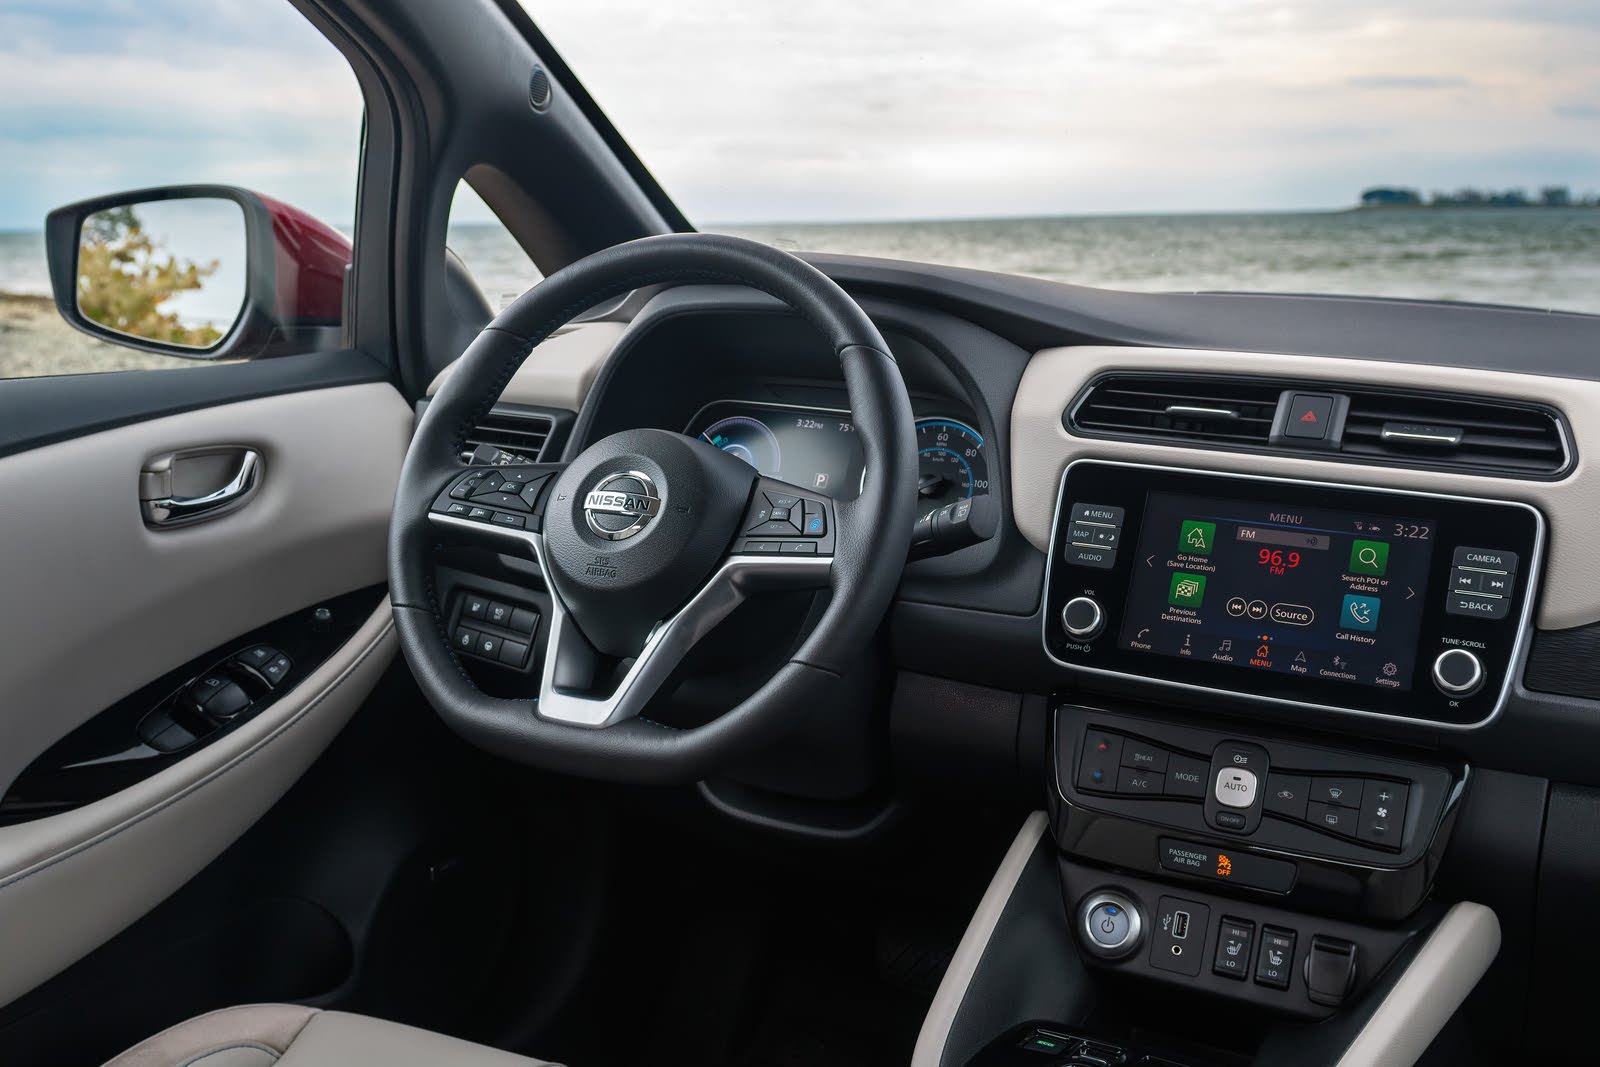 2020 Nissan LEAF Test Drive Review